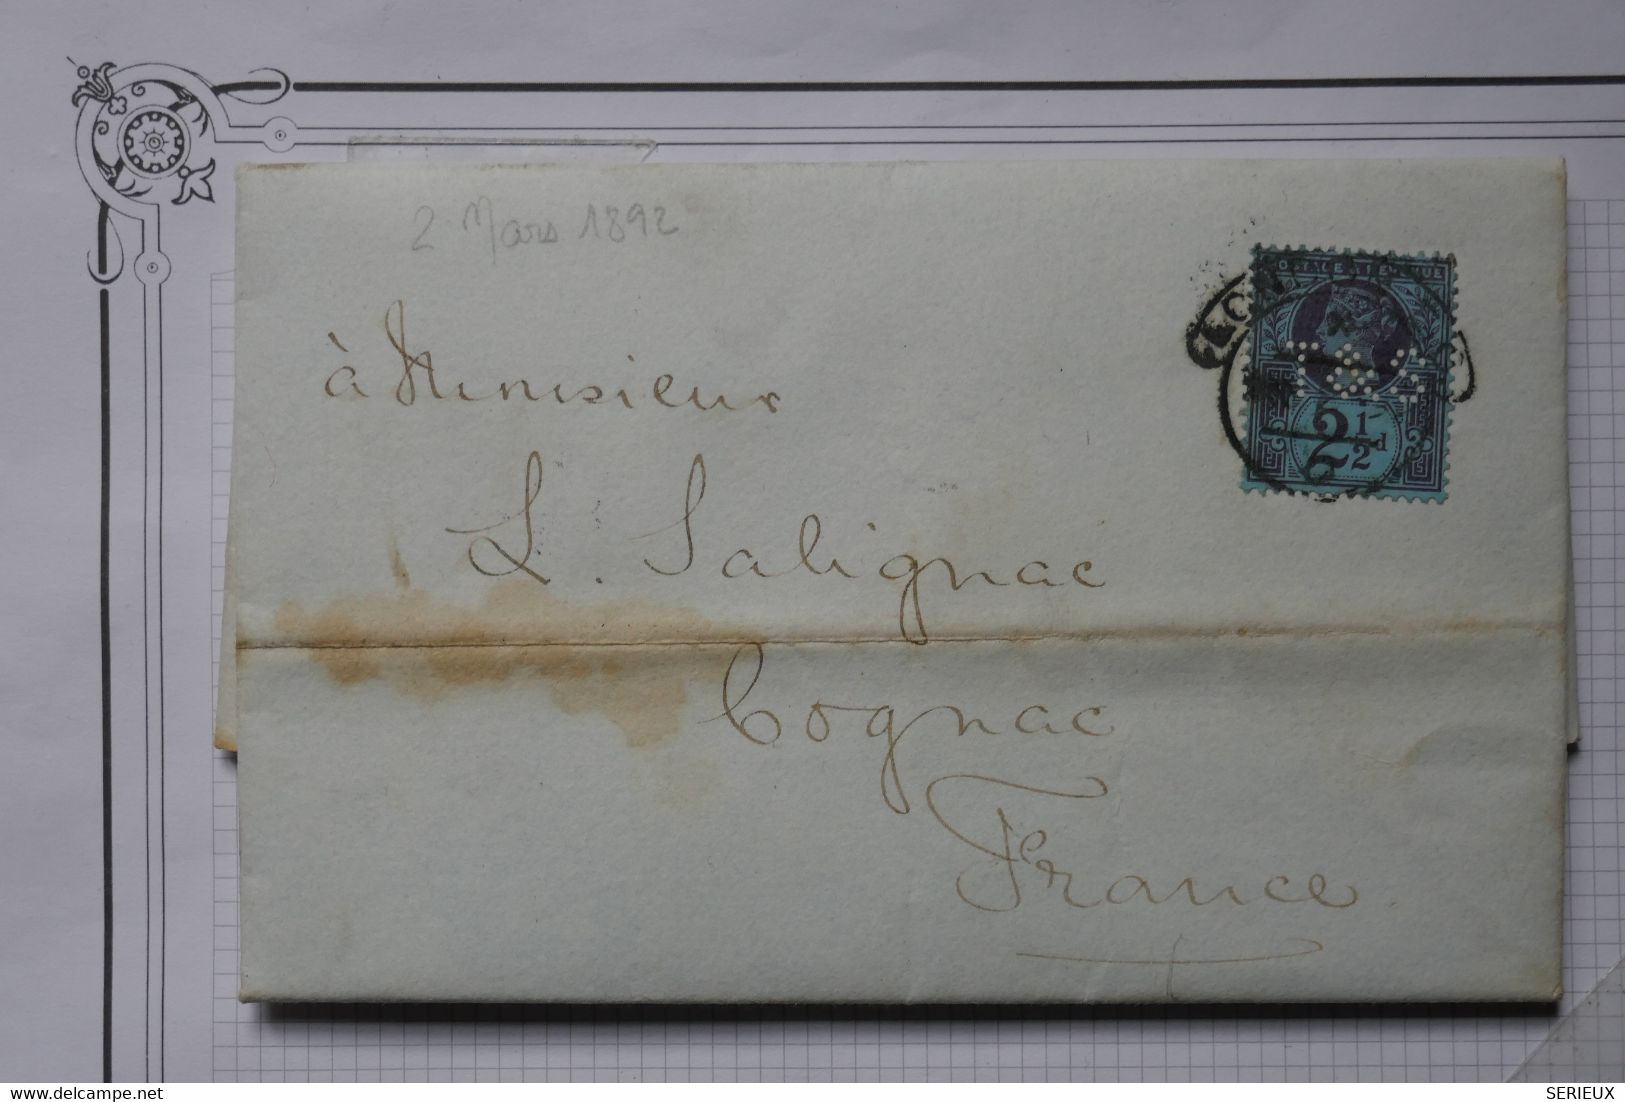 V12 ENGLAND GREAT COVER + PERFIN T S 1892  LONDON   TO COGNAC FRANCE ++2 1\2 PENCE + AFFRANCH. PLAISANT - Briefe U. Dokumente